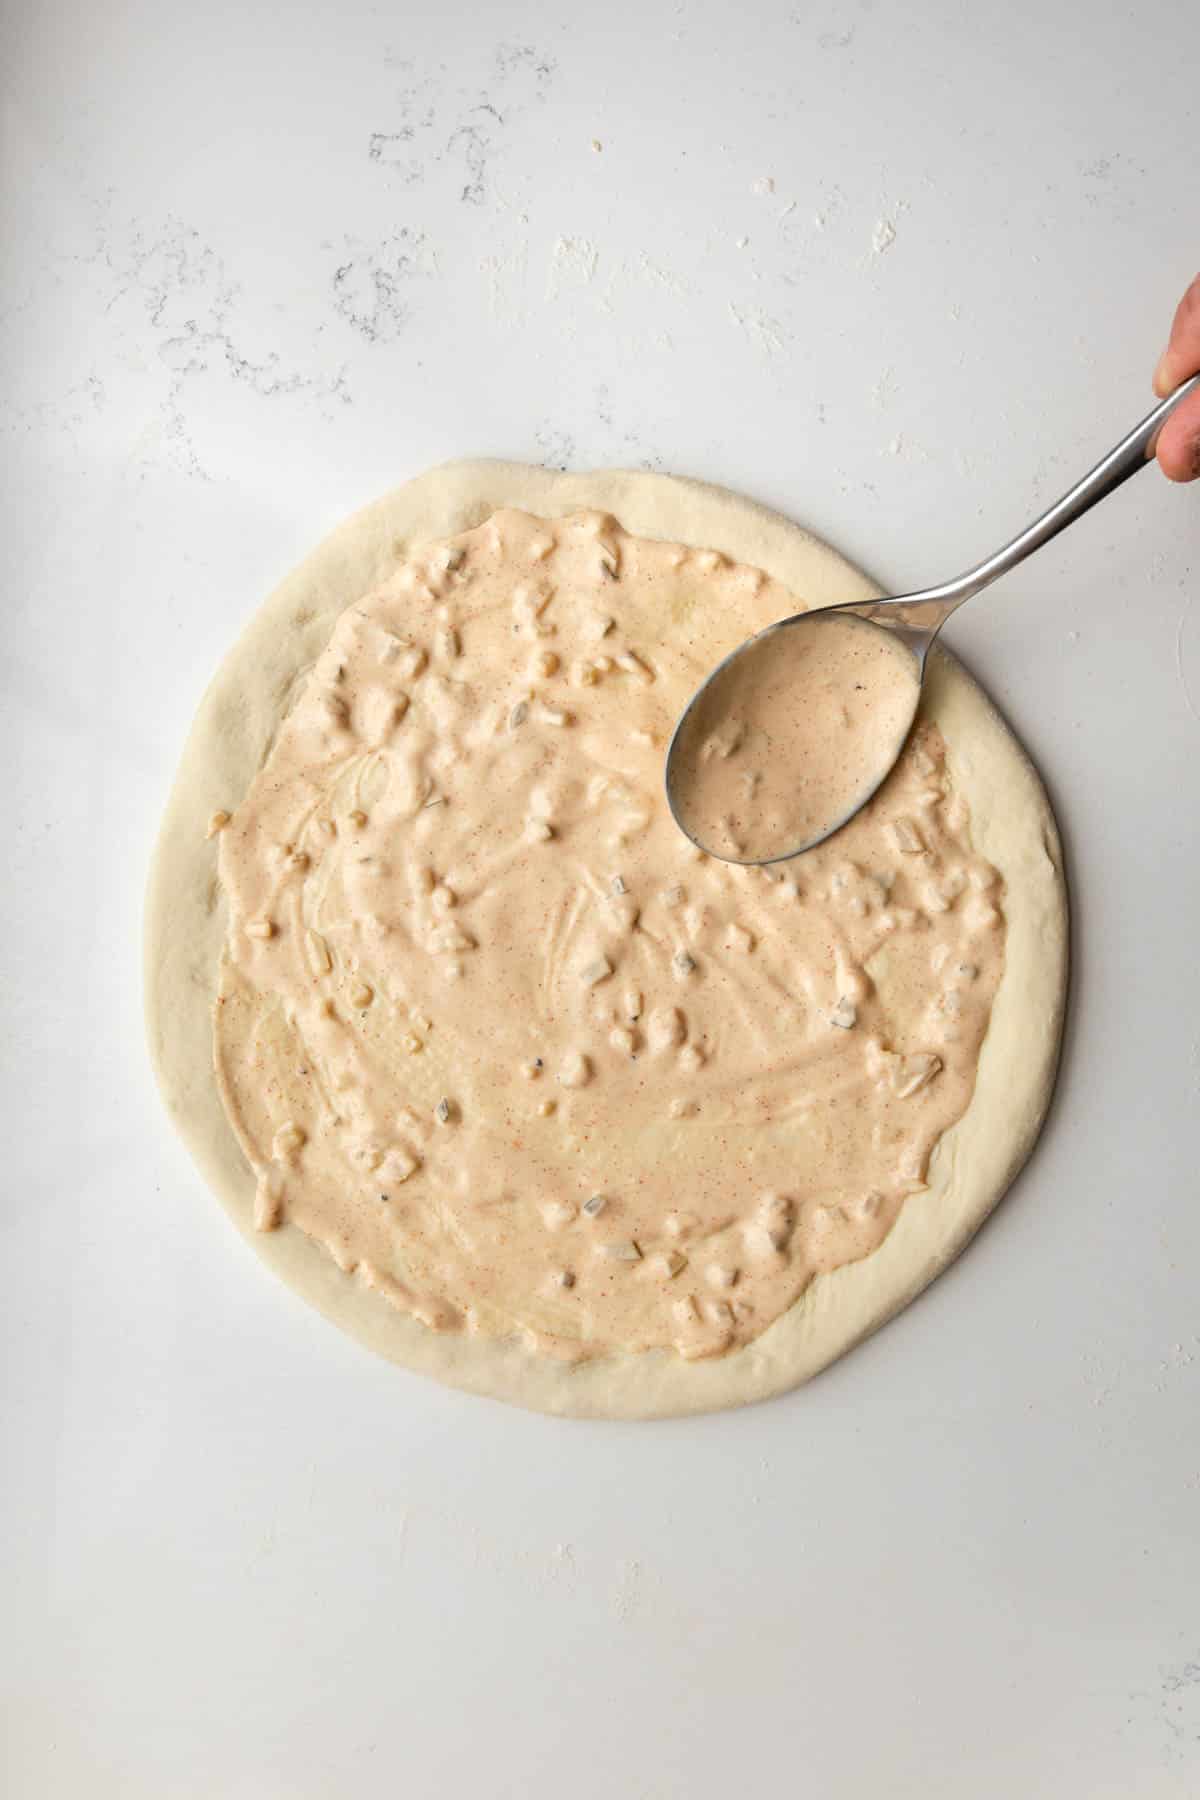 PIzza dough rolled out in a circle on a marble table with Big Mac Sauce spooned out over it.